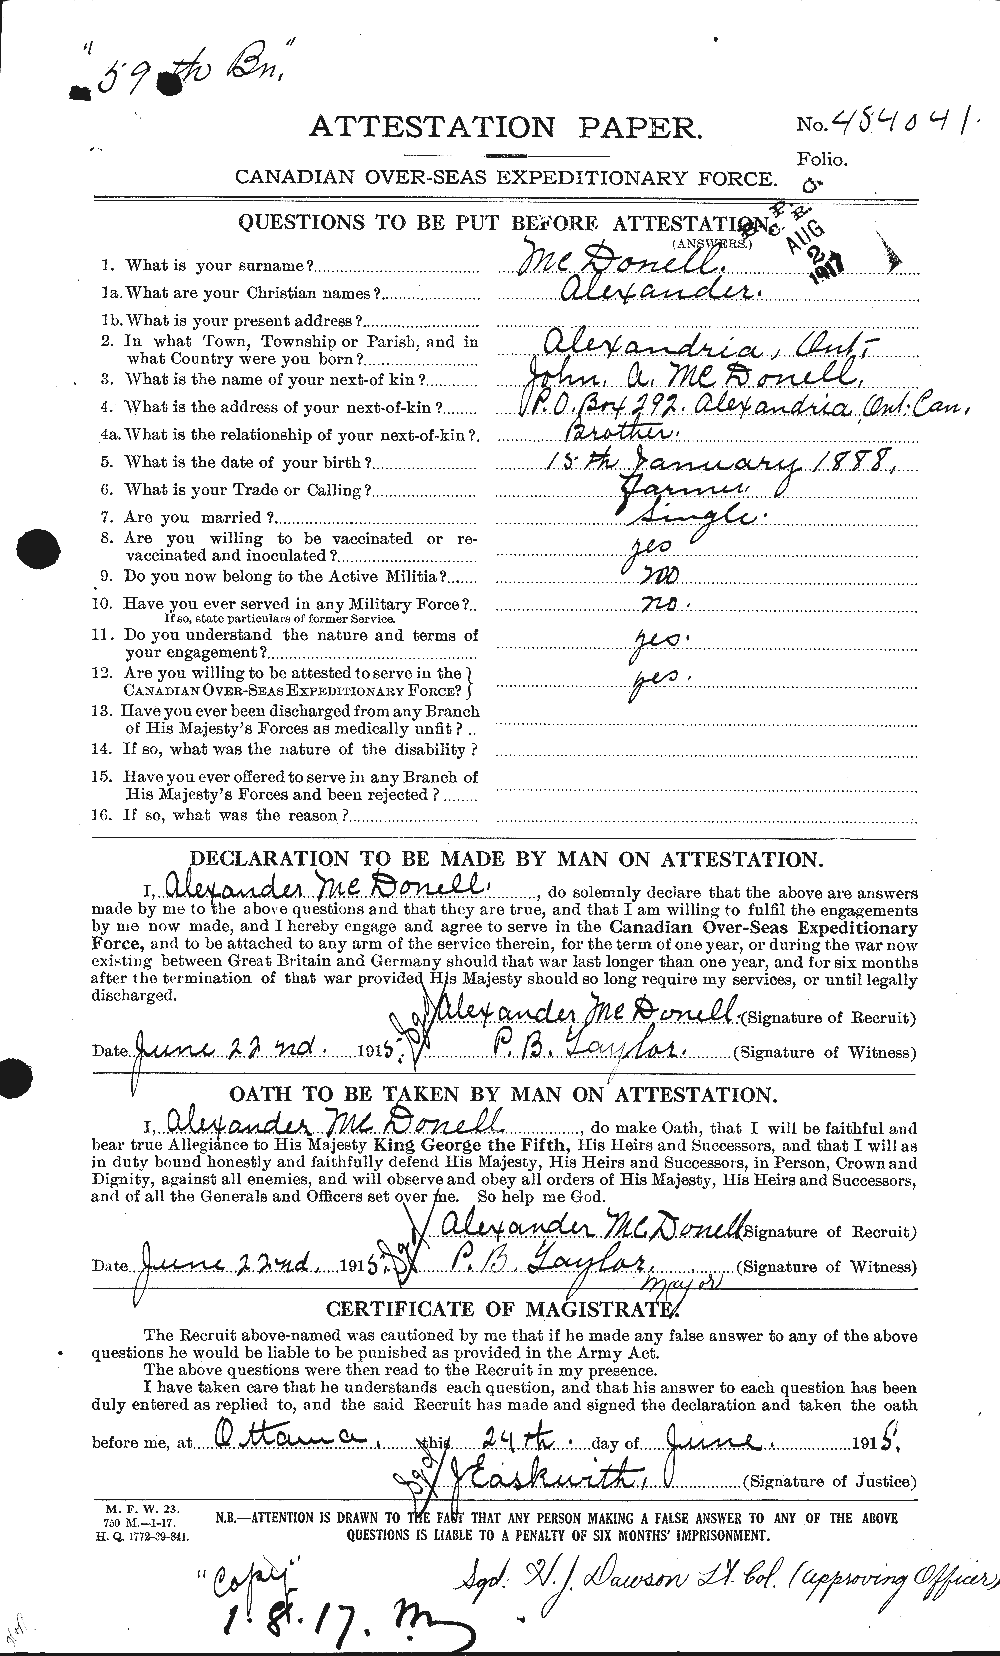 Personnel Records of the First World War - CEF 521382a